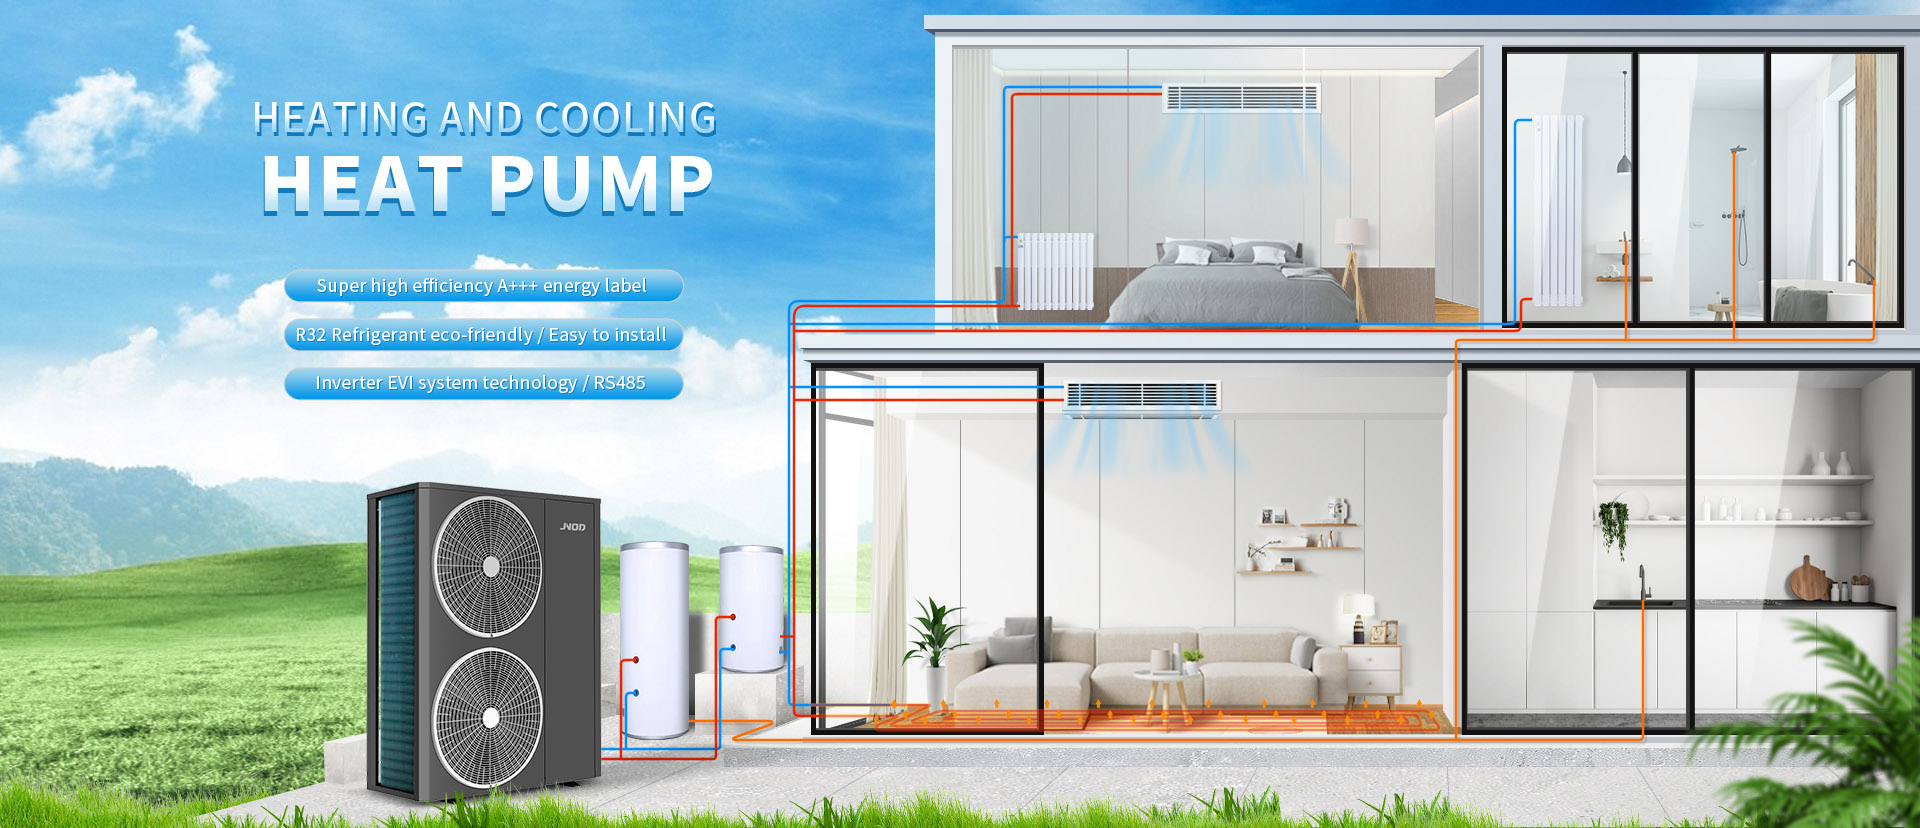 Heating And Cooling Heat Pump make money